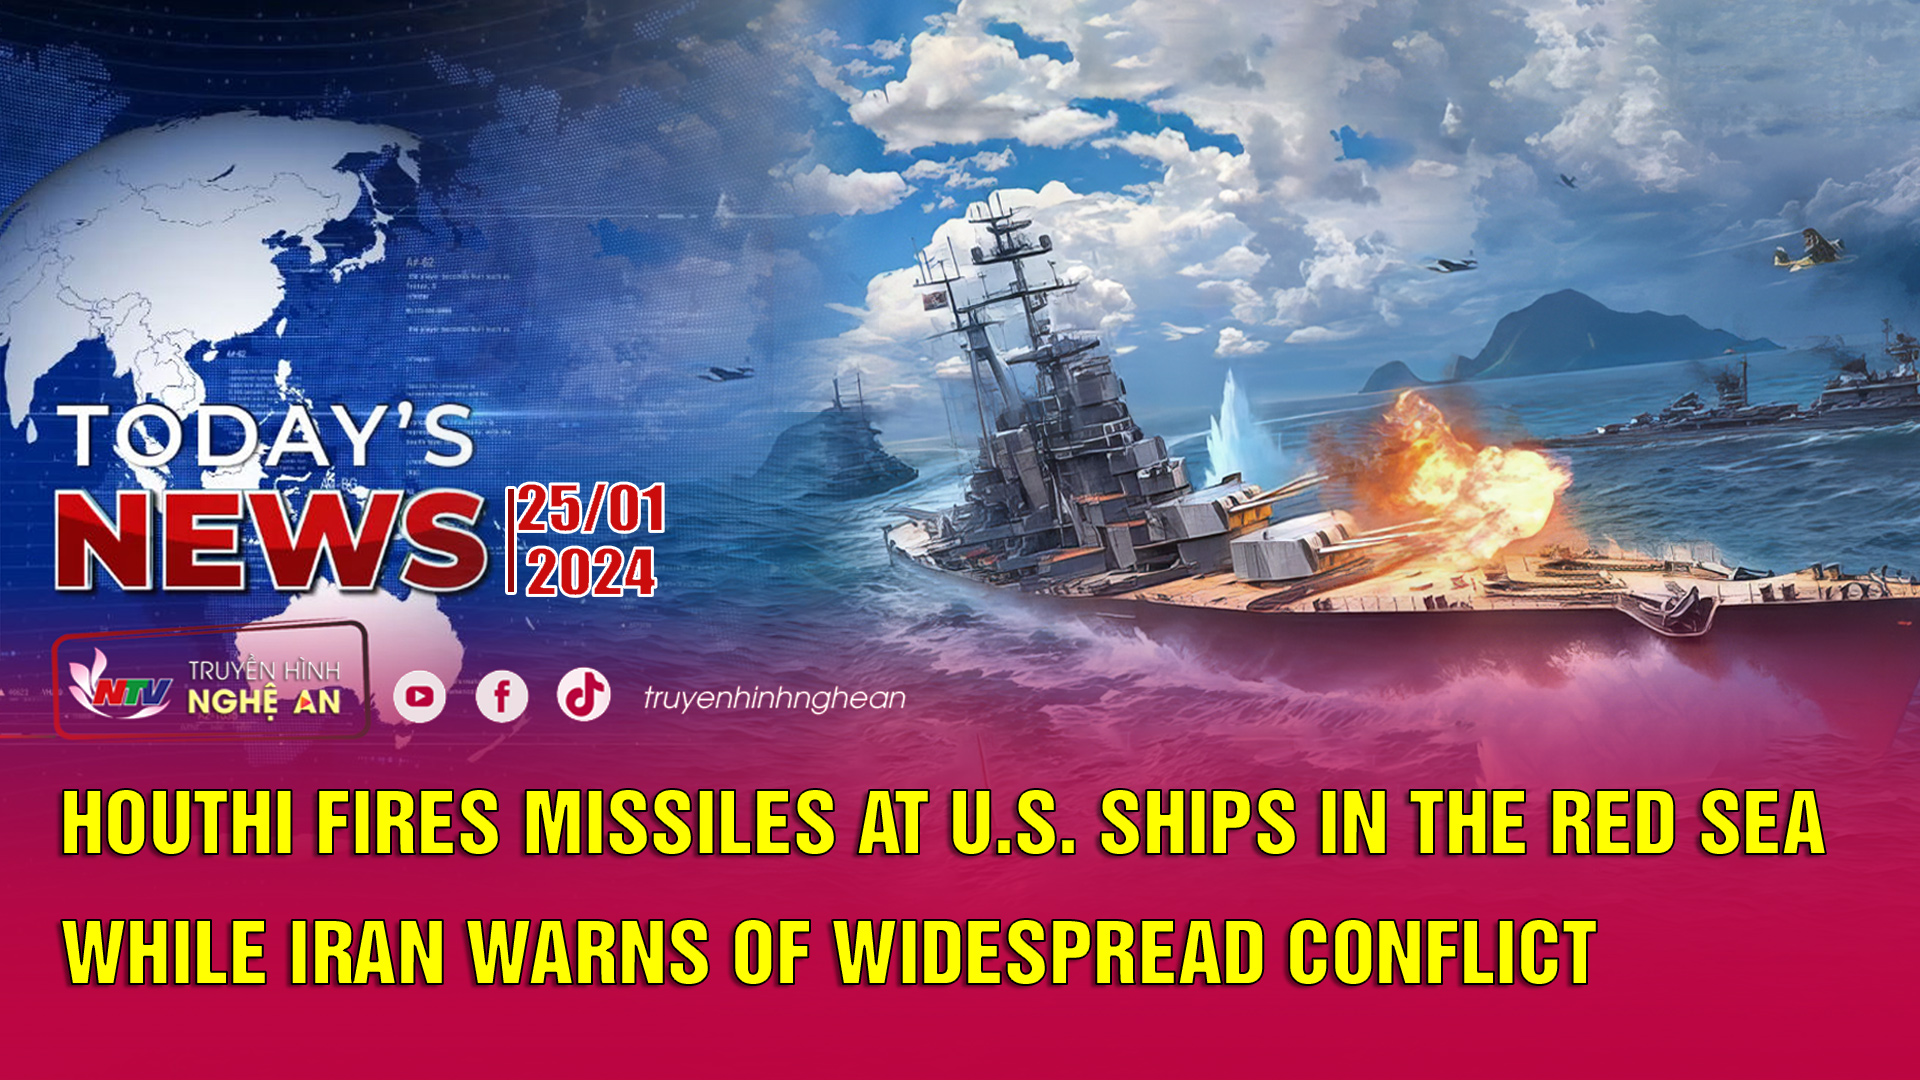 Today's News - 25/01/2024: Houthi fires missiles at U.S. ships in the Red Sea